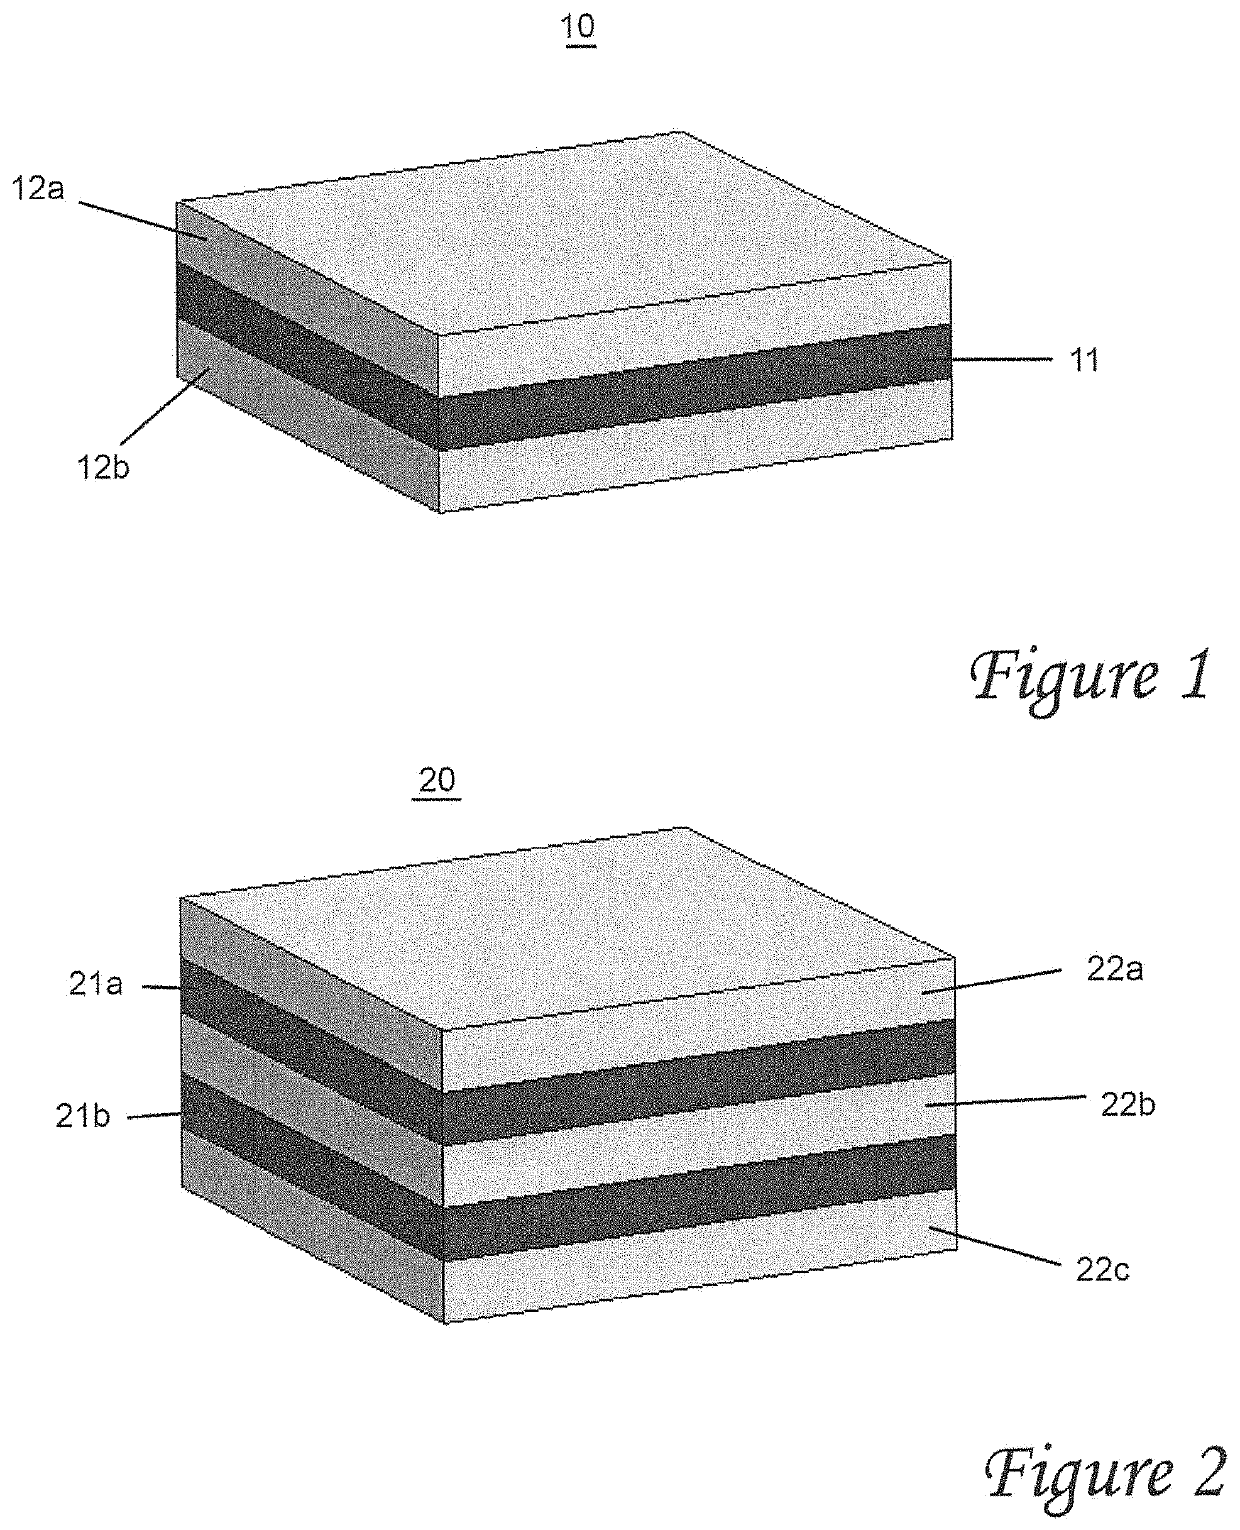 Method for fabricating a hyperbolic metamaterial having a near-zero refractive index in the optical regime